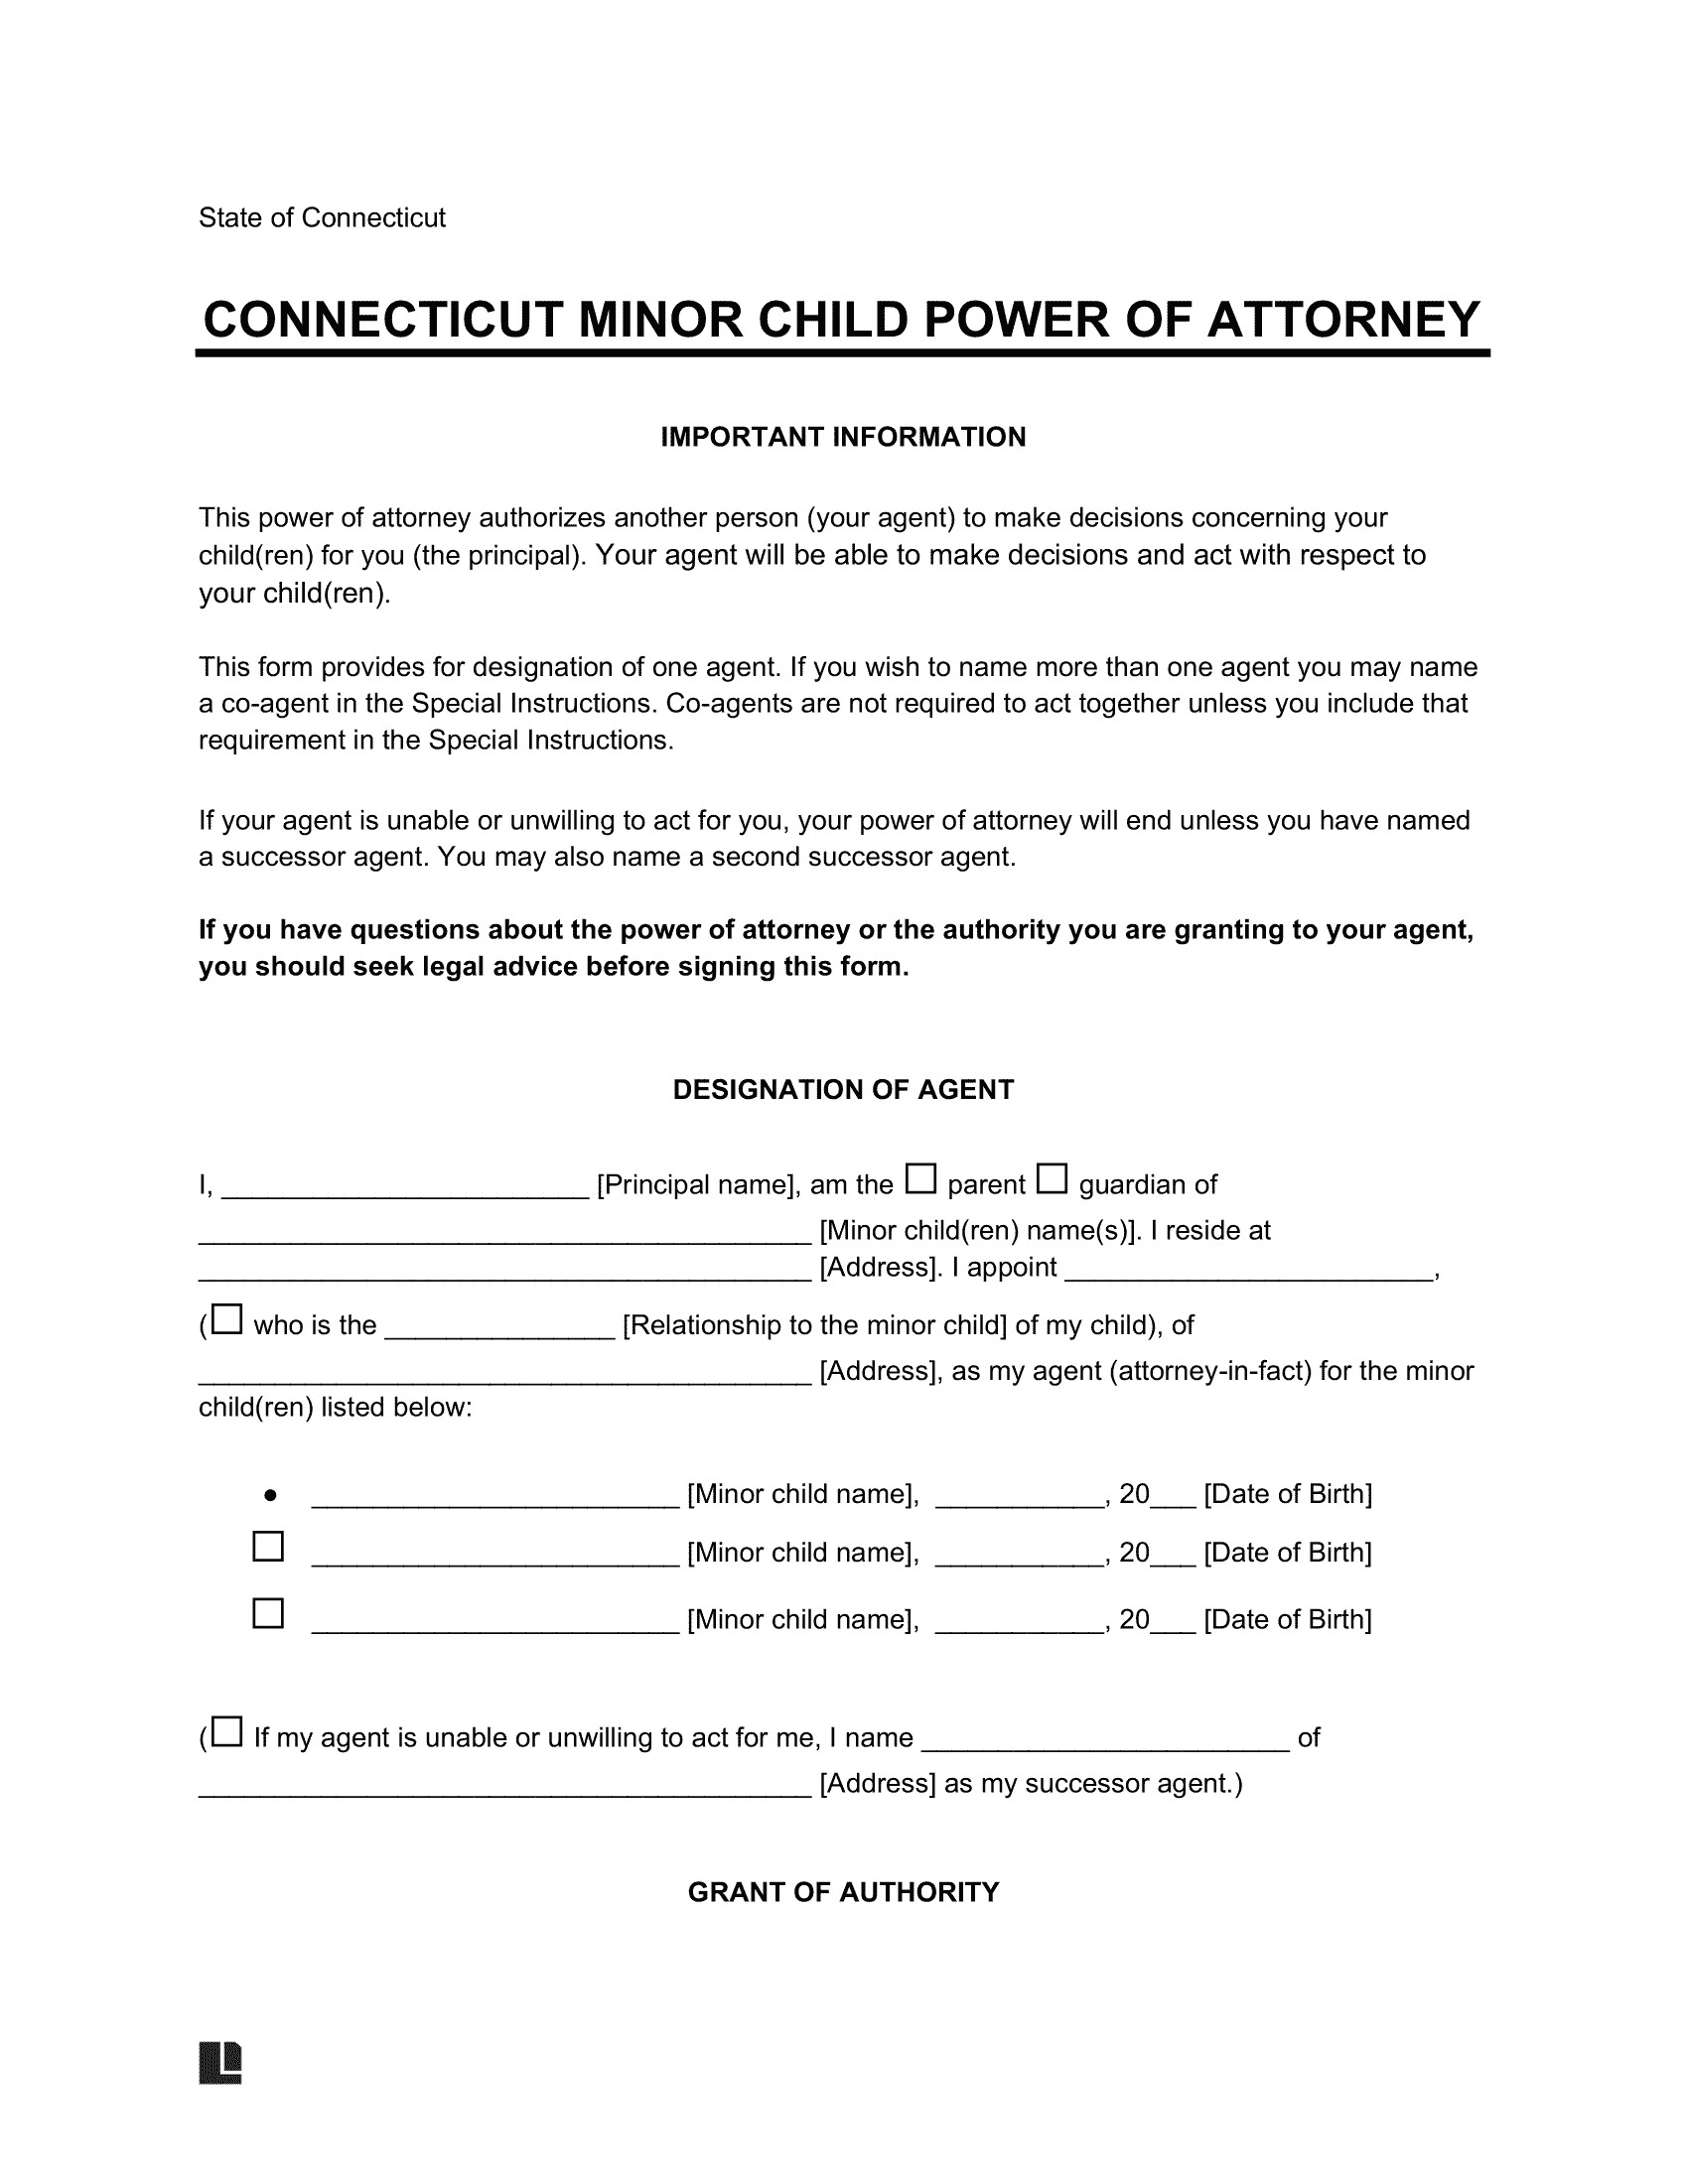 Connecticut Minor Child Power of Attorney Form